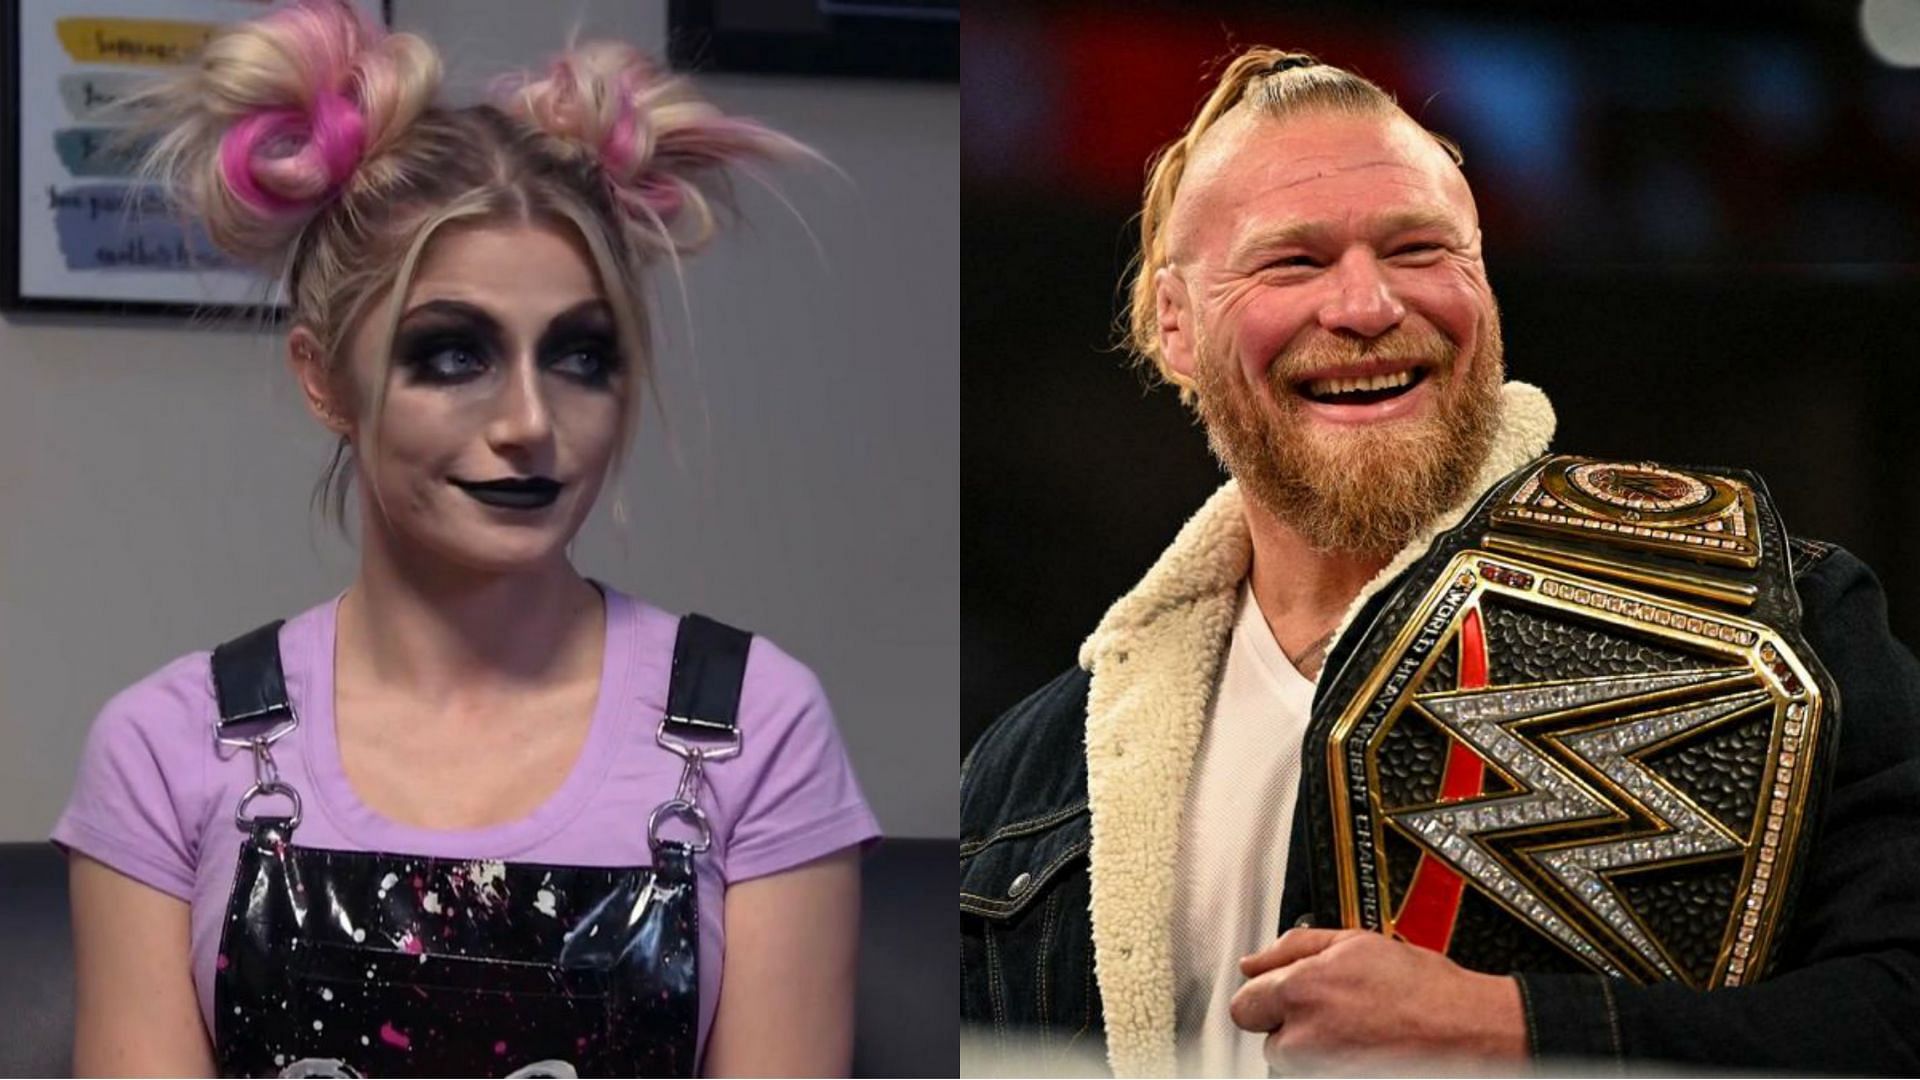 Alexa Bliss and Brock Lesnar appeared in segments